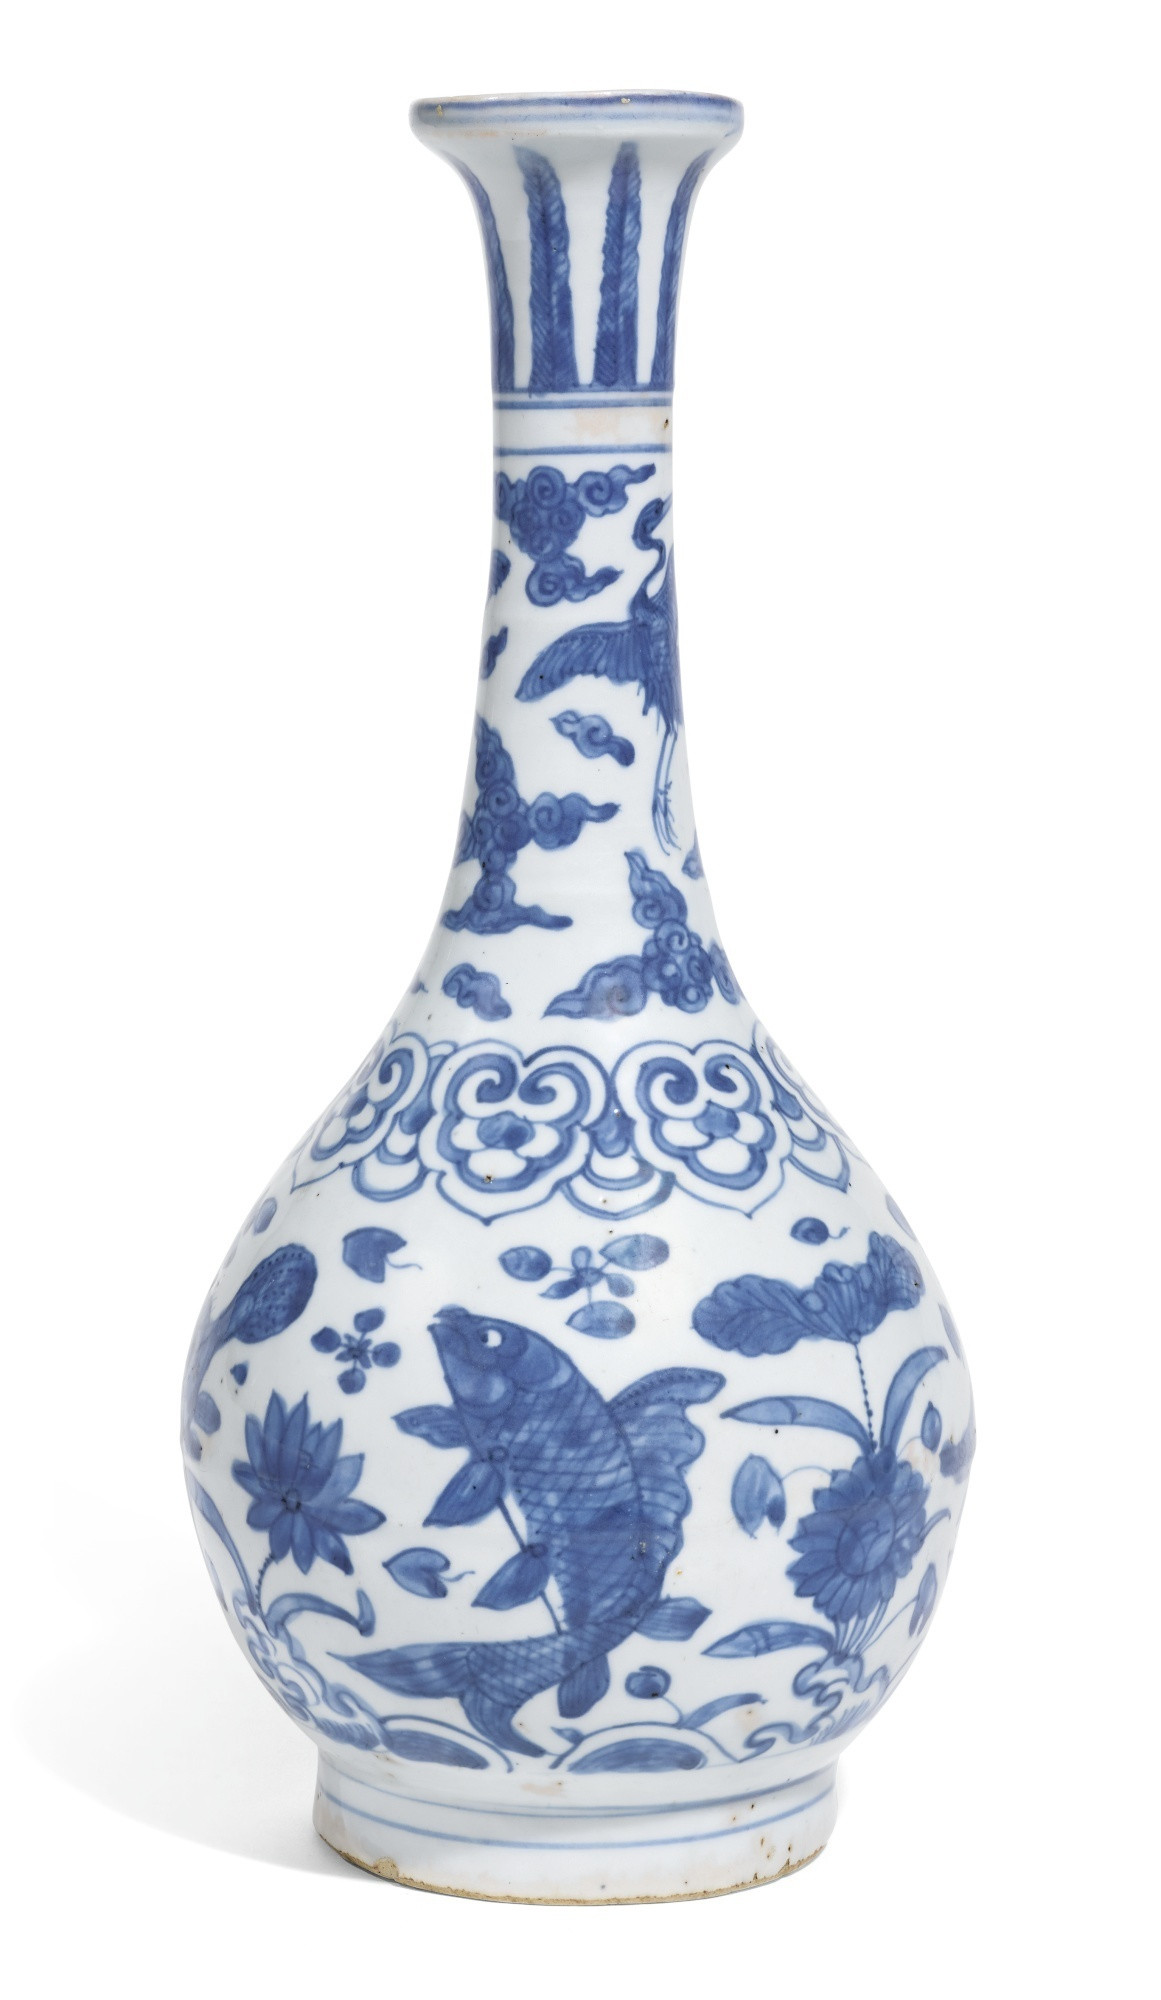 26 Lovable Tall Thin Blue Vase 2024 free download tall thin blue vase of an unusual blue and white ming vase yuhuchun ping with fish regarding an unusual blue and white ming vase yuhuchun ping with fish decoration